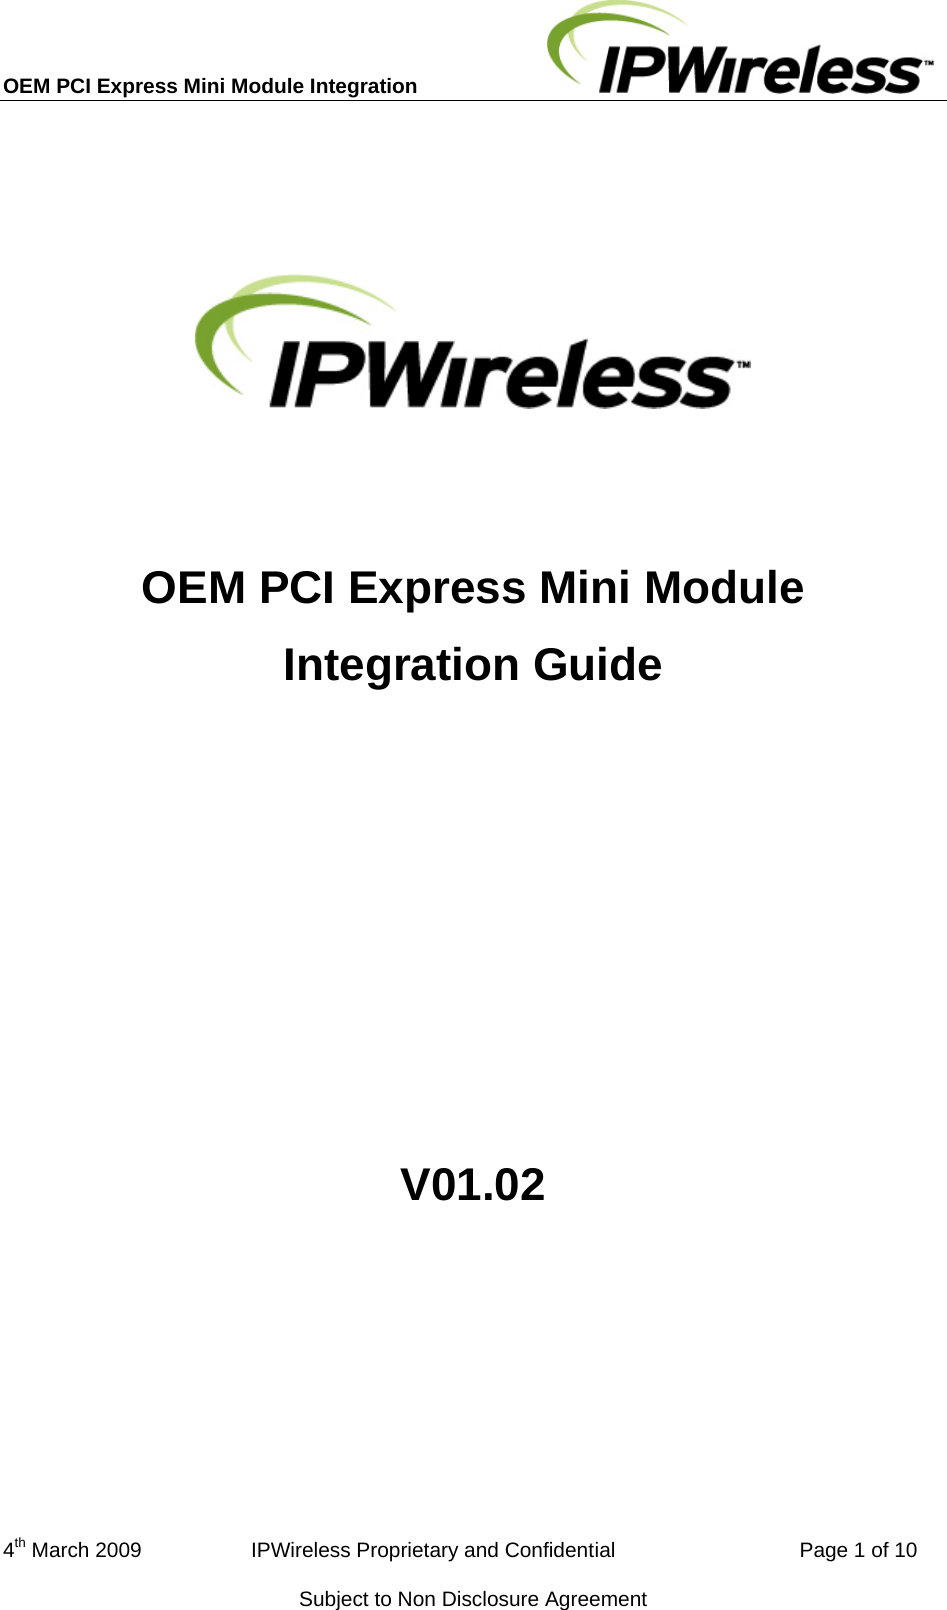 OEM PCI Express Mini Module Integration           OEM PCI Express Mini Module Integration Guide       V01.02    4th March 2009                   IPWireless Proprietary and Confidential                                Page 1 of 10 Subject to Non Disclosure Agreement 